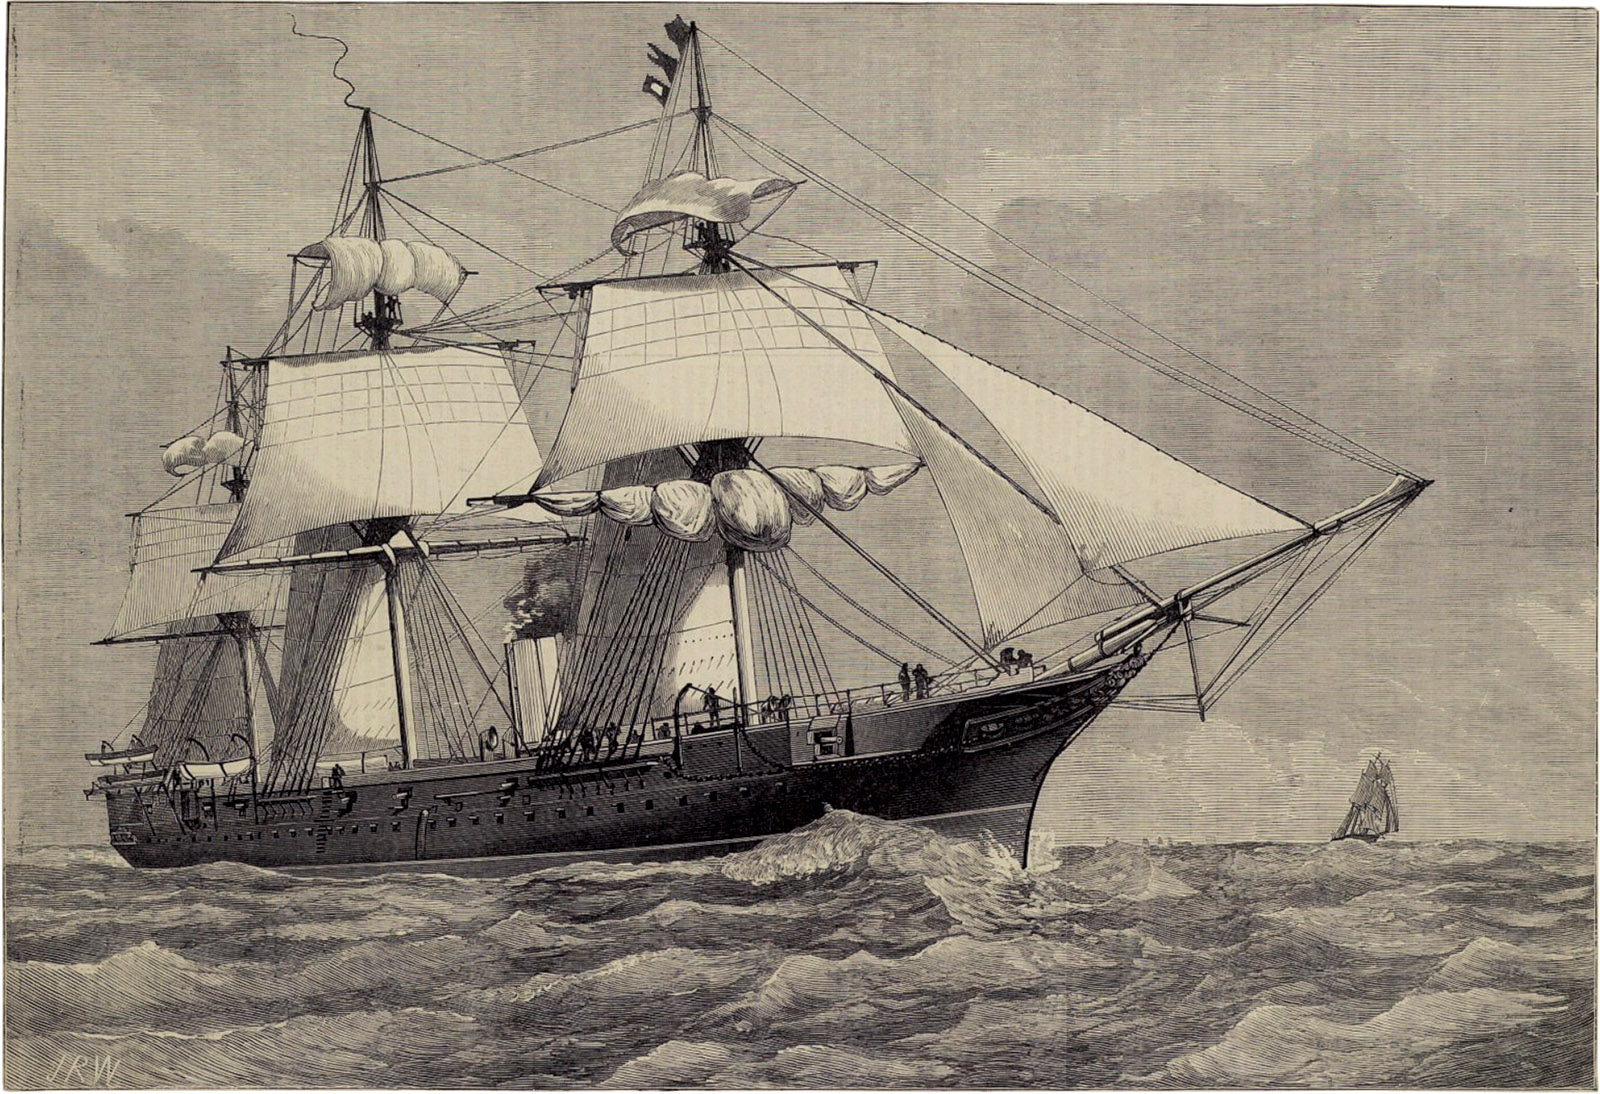 HMS Tourmaline, a flagship of the West Africa Squadron